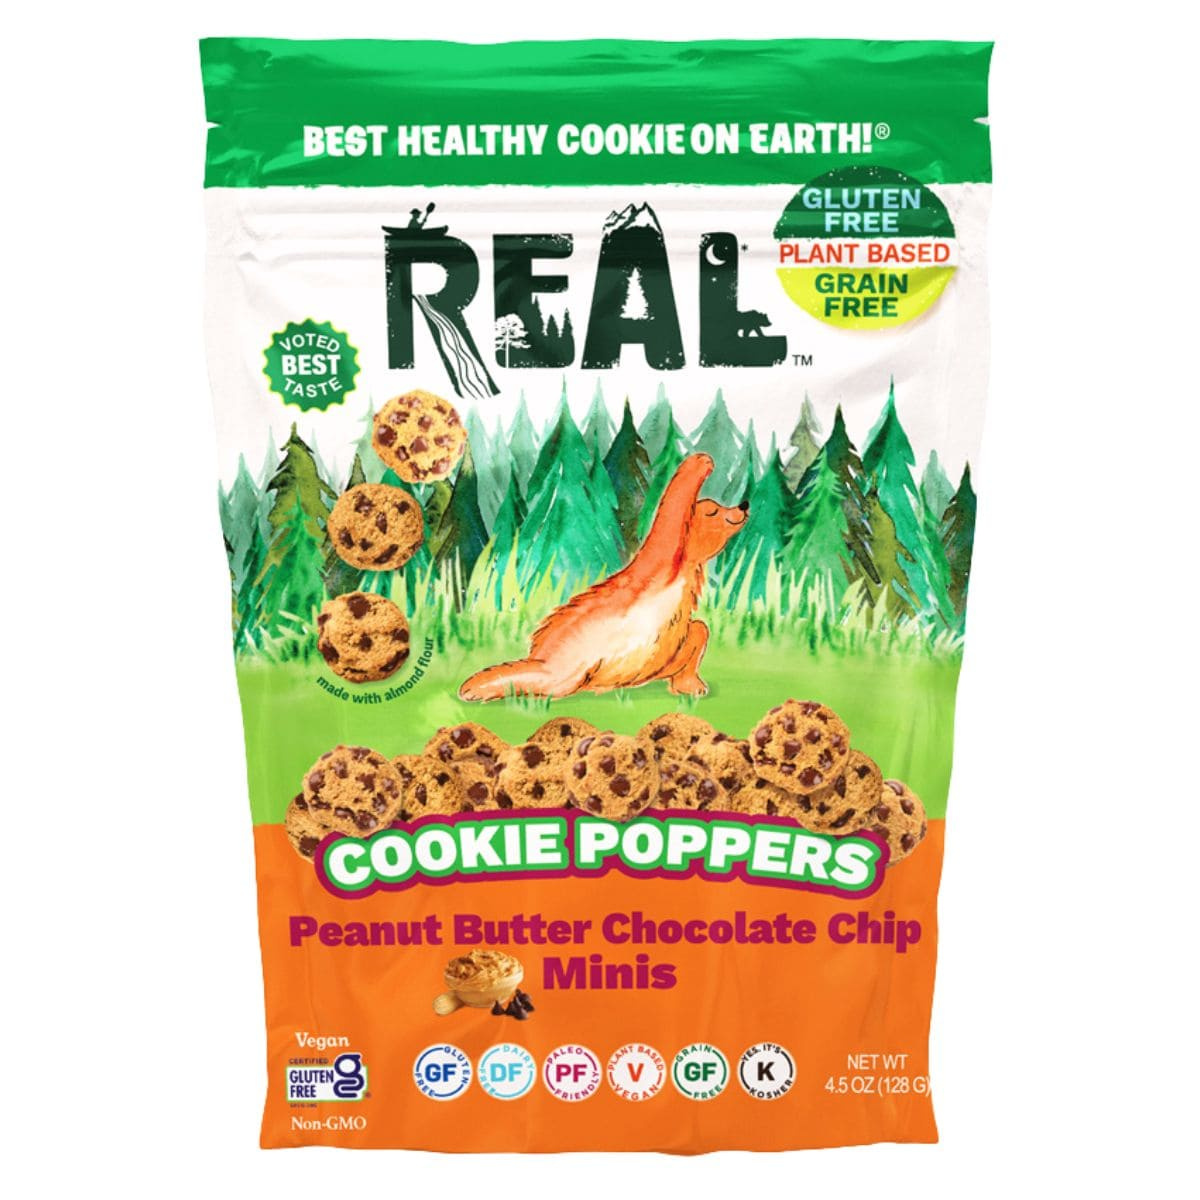 Picture of Real Cookies KHRM02206431 4.5 oz Peanut Butter Chocolate Chip Cookie Poppers